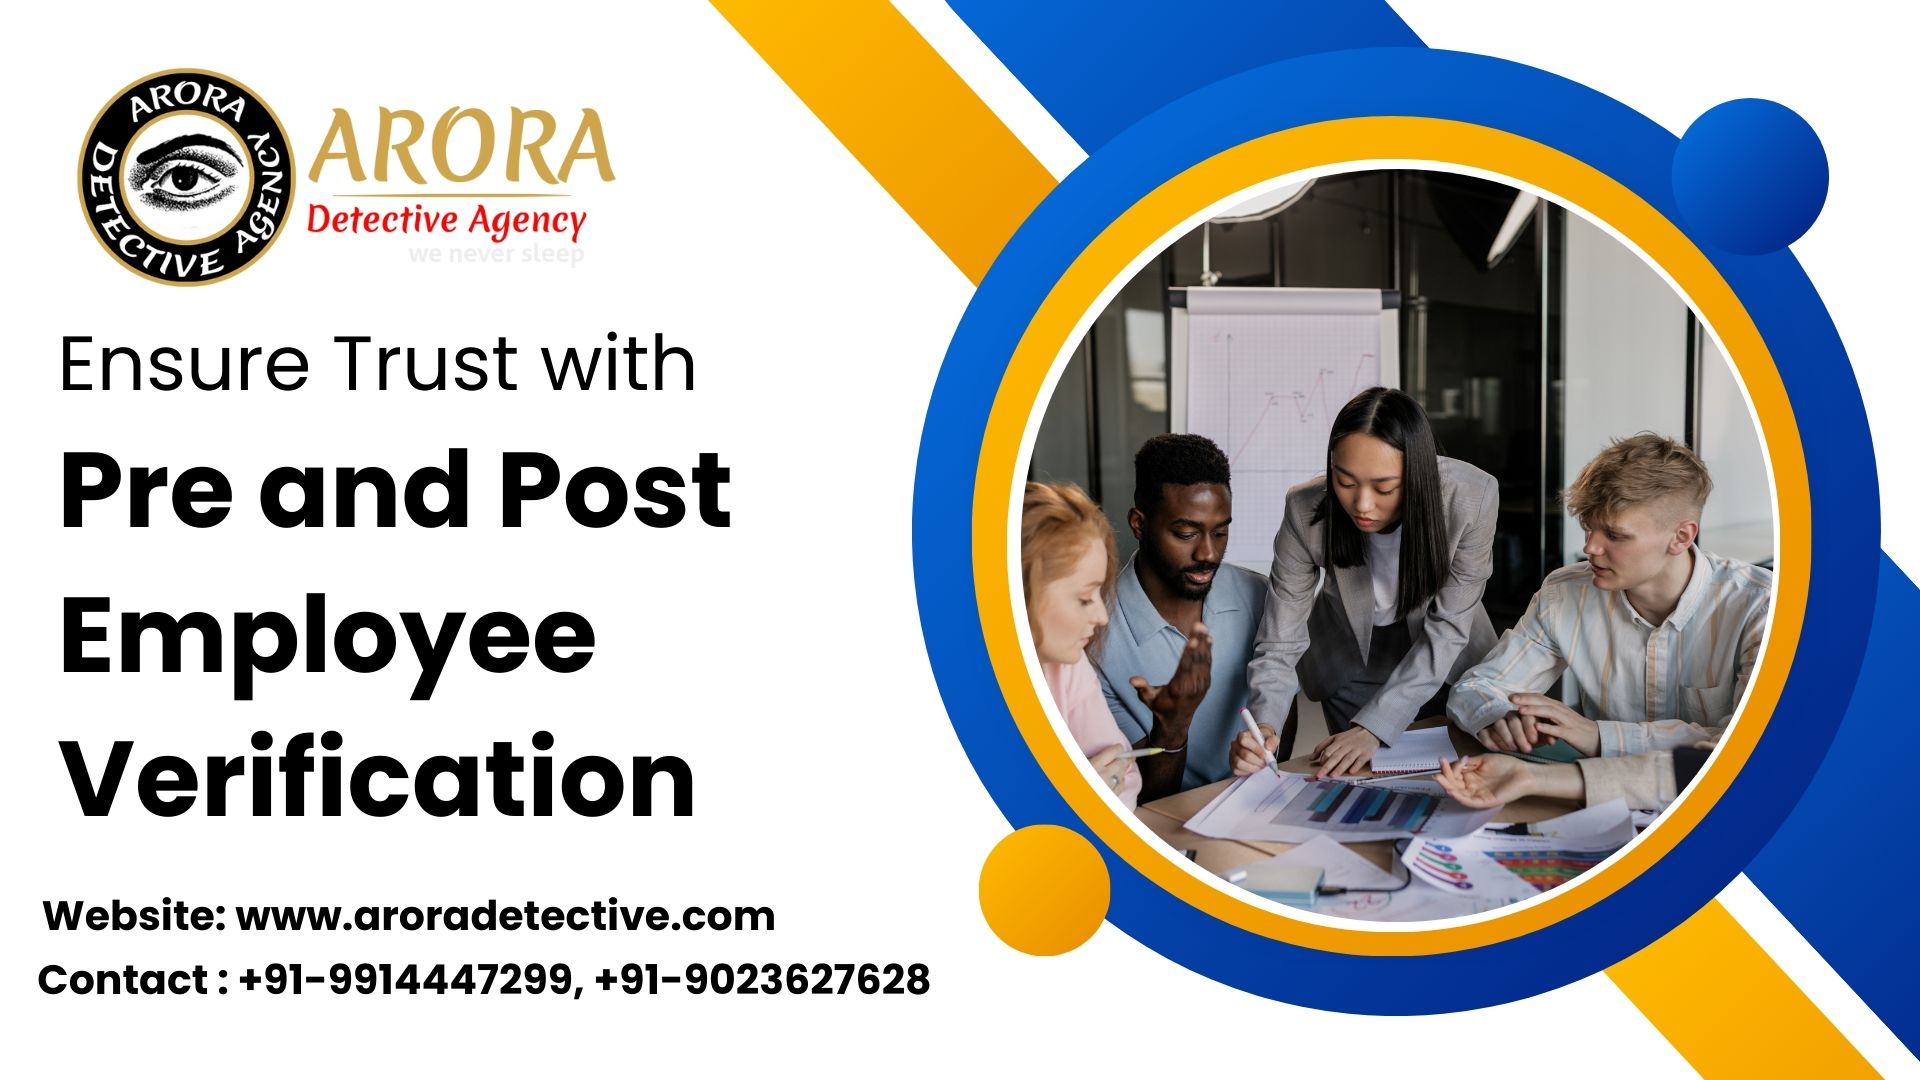 Ensure Trust with Pre and Post Employee Verification by Arora Detective Agency